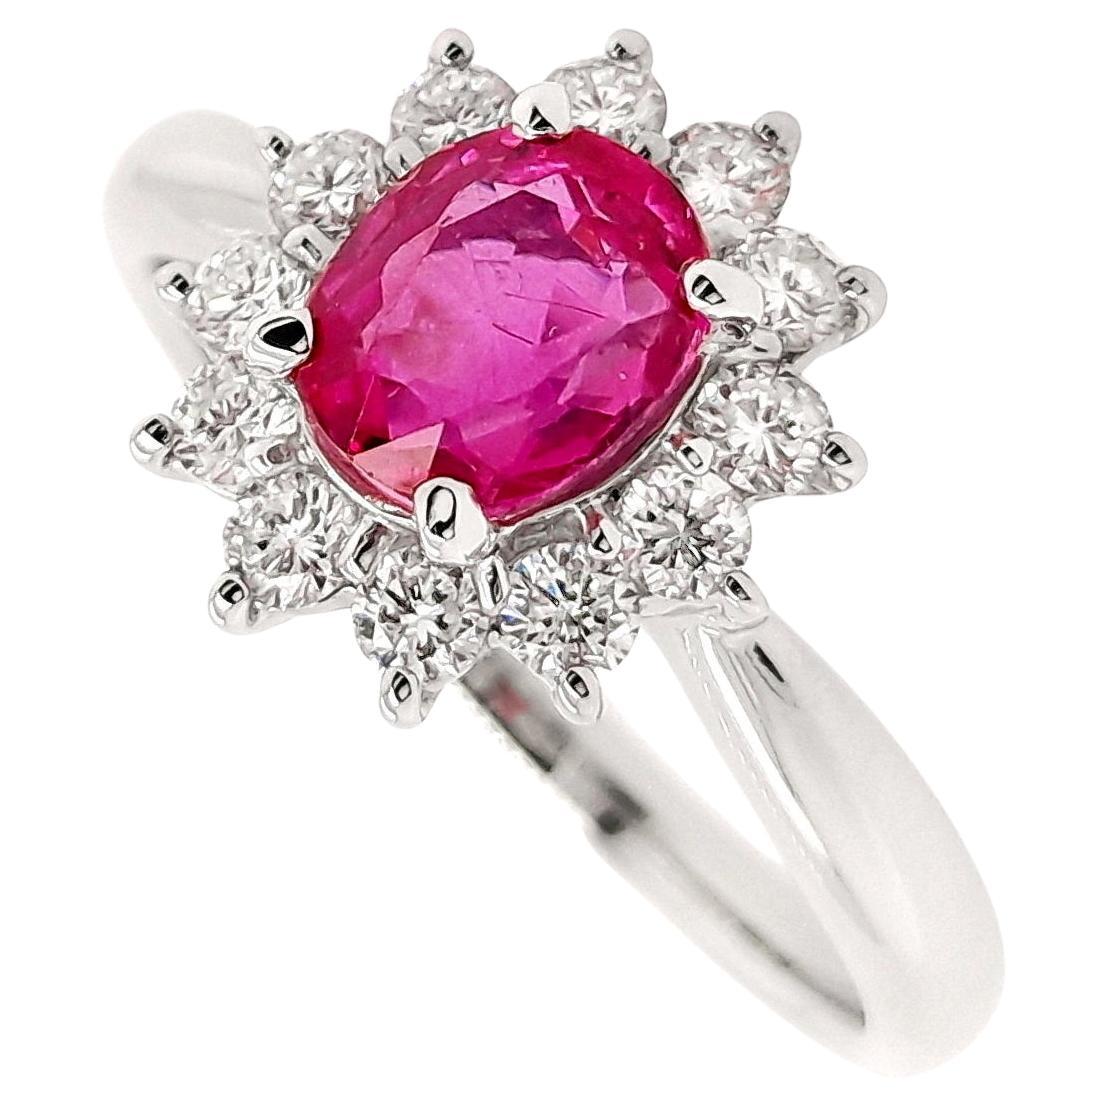 IGI Certified 1.09ct Not-treated Ruby and 0.41ct Natural Diamonds Platinum Ring